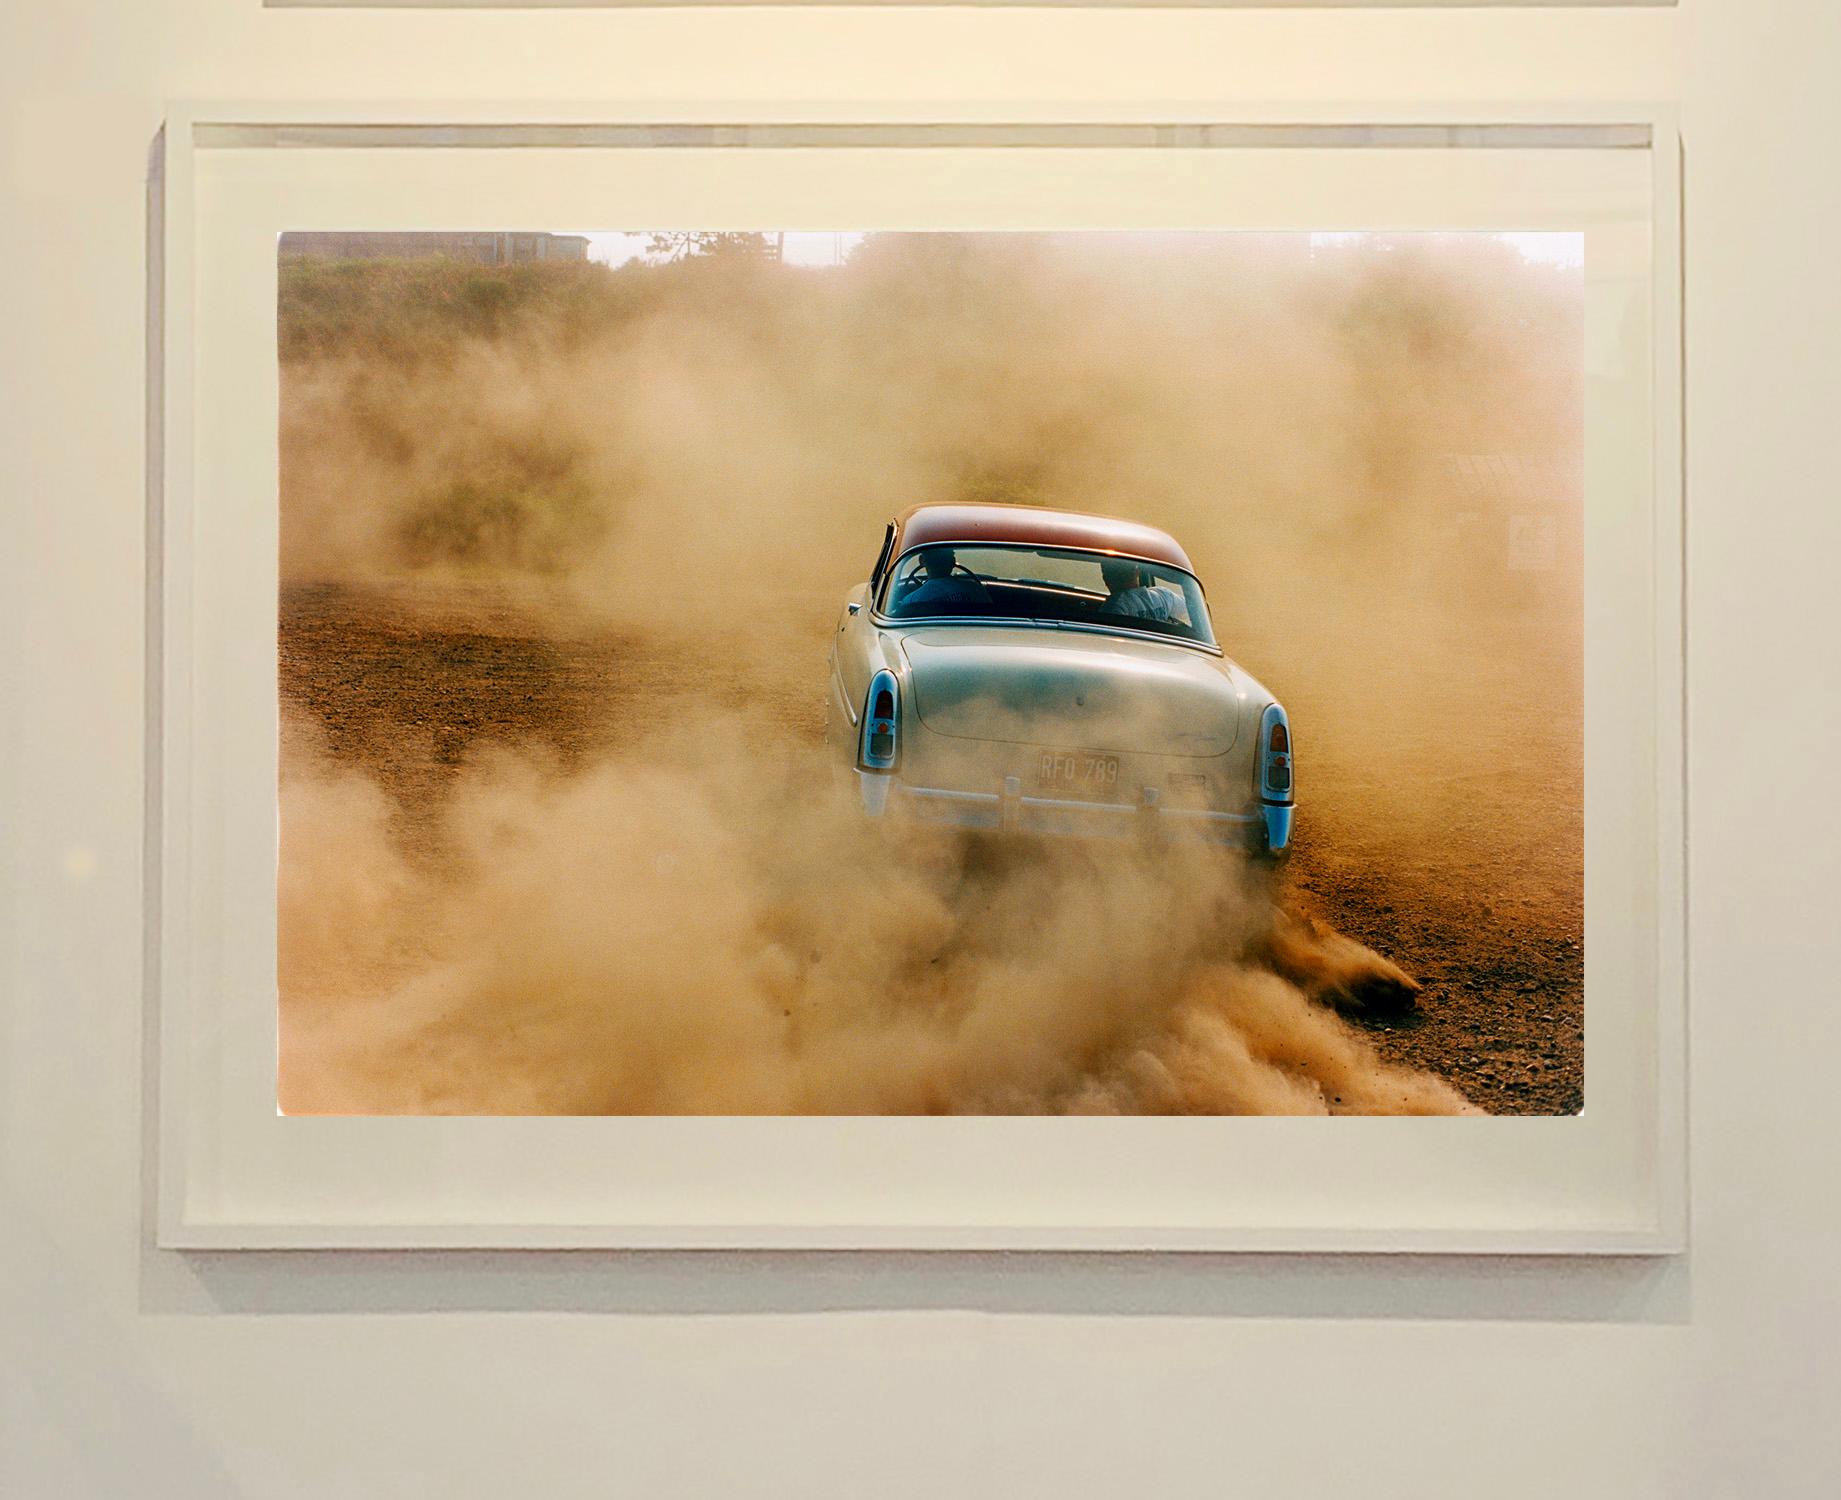 Mercury in the Dust, Hemsby, Norfolk - Car on a beach color photography - Contemporary Photograph by Richard Heeps